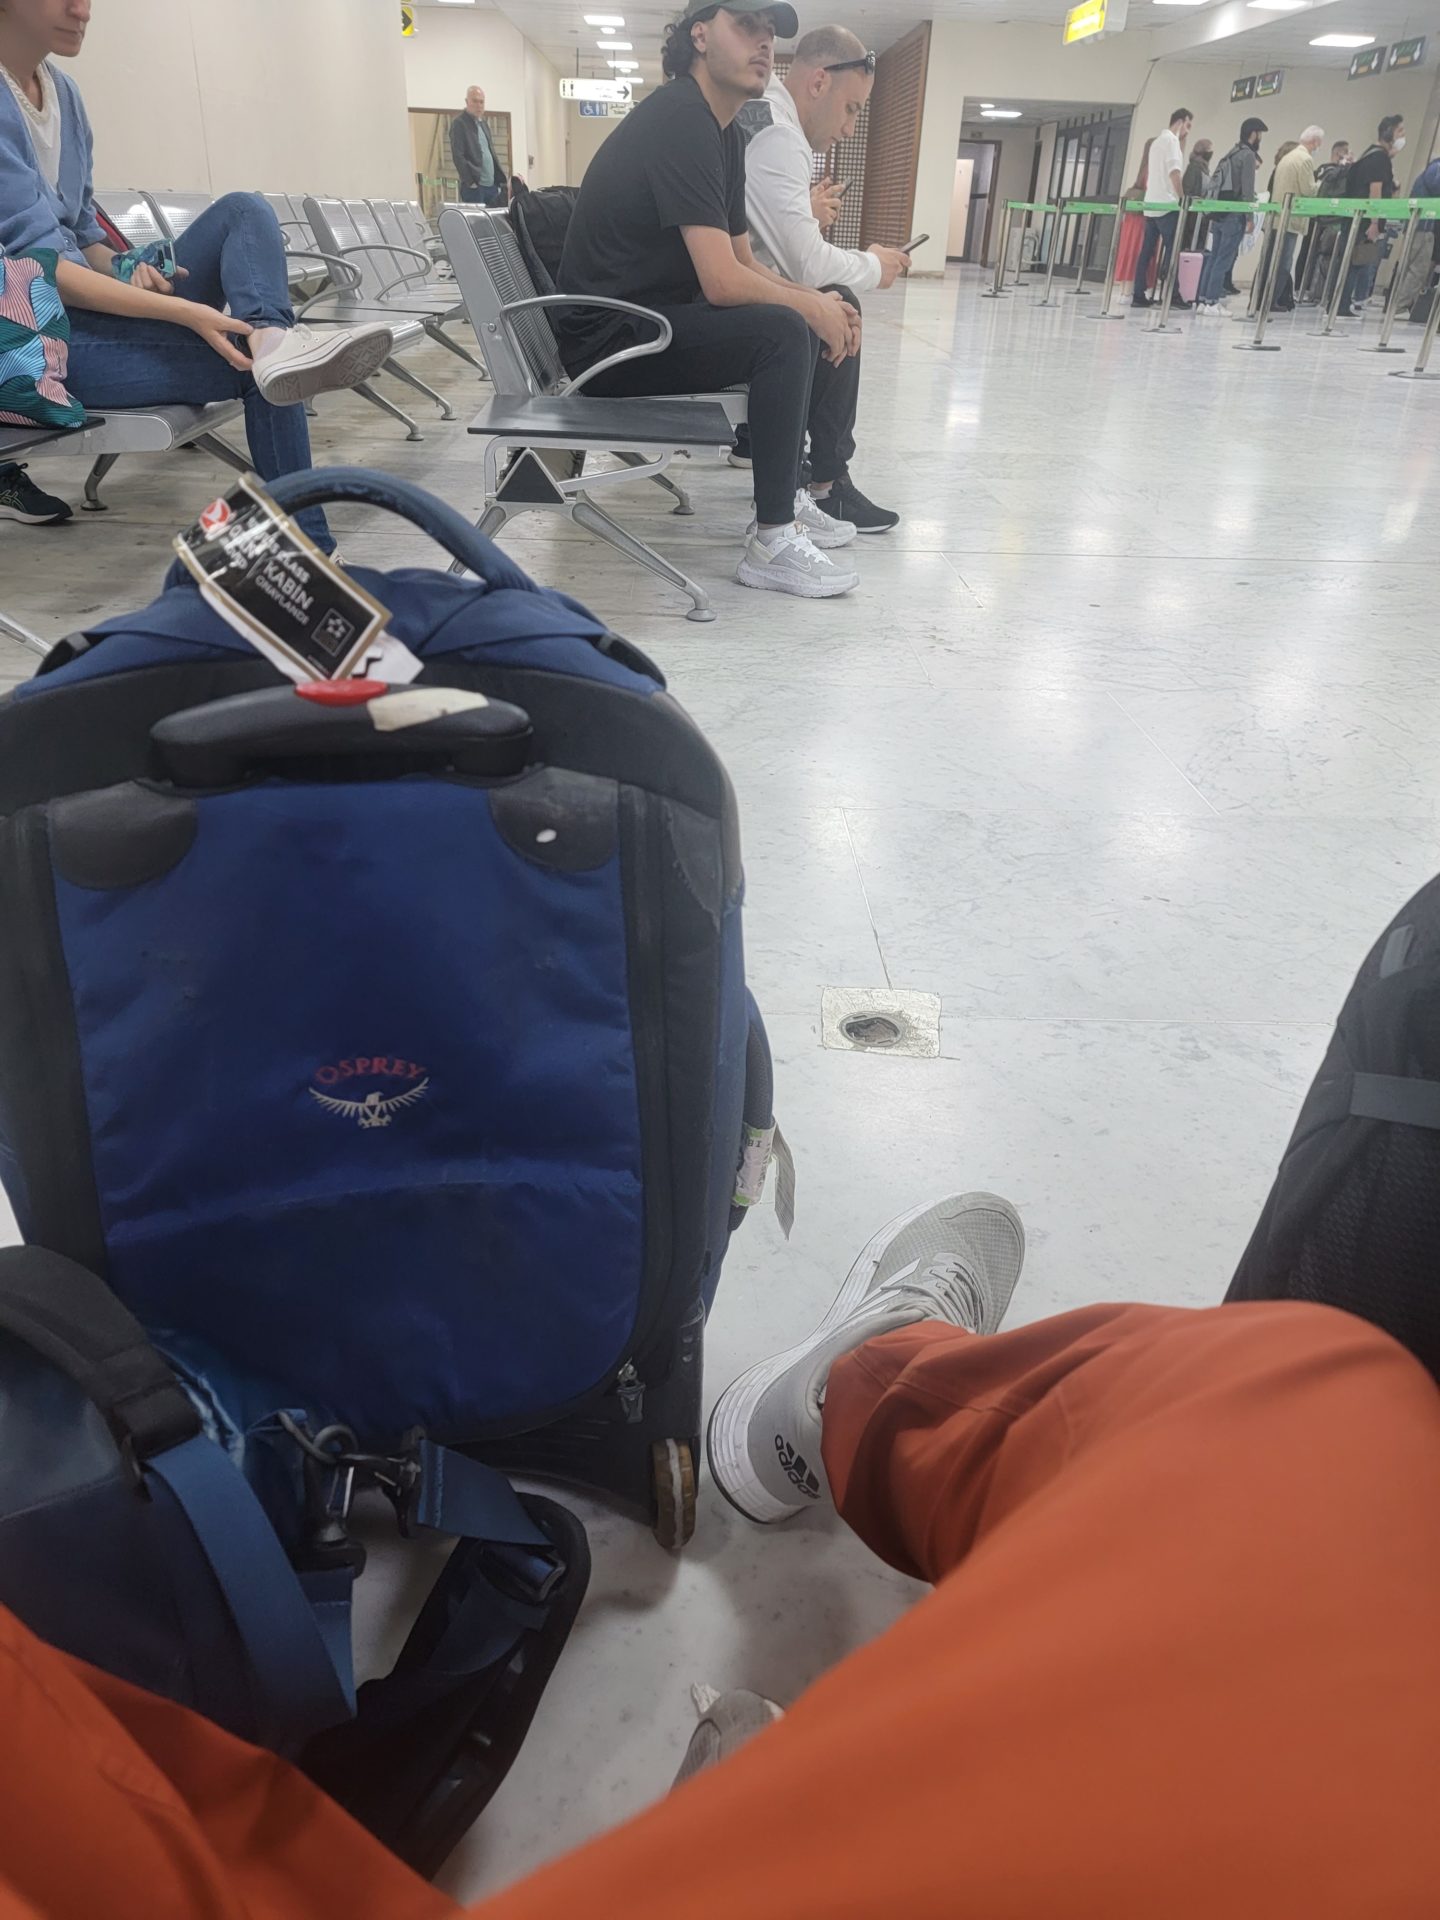 a group of people sitting in chairs and a blue suitcase